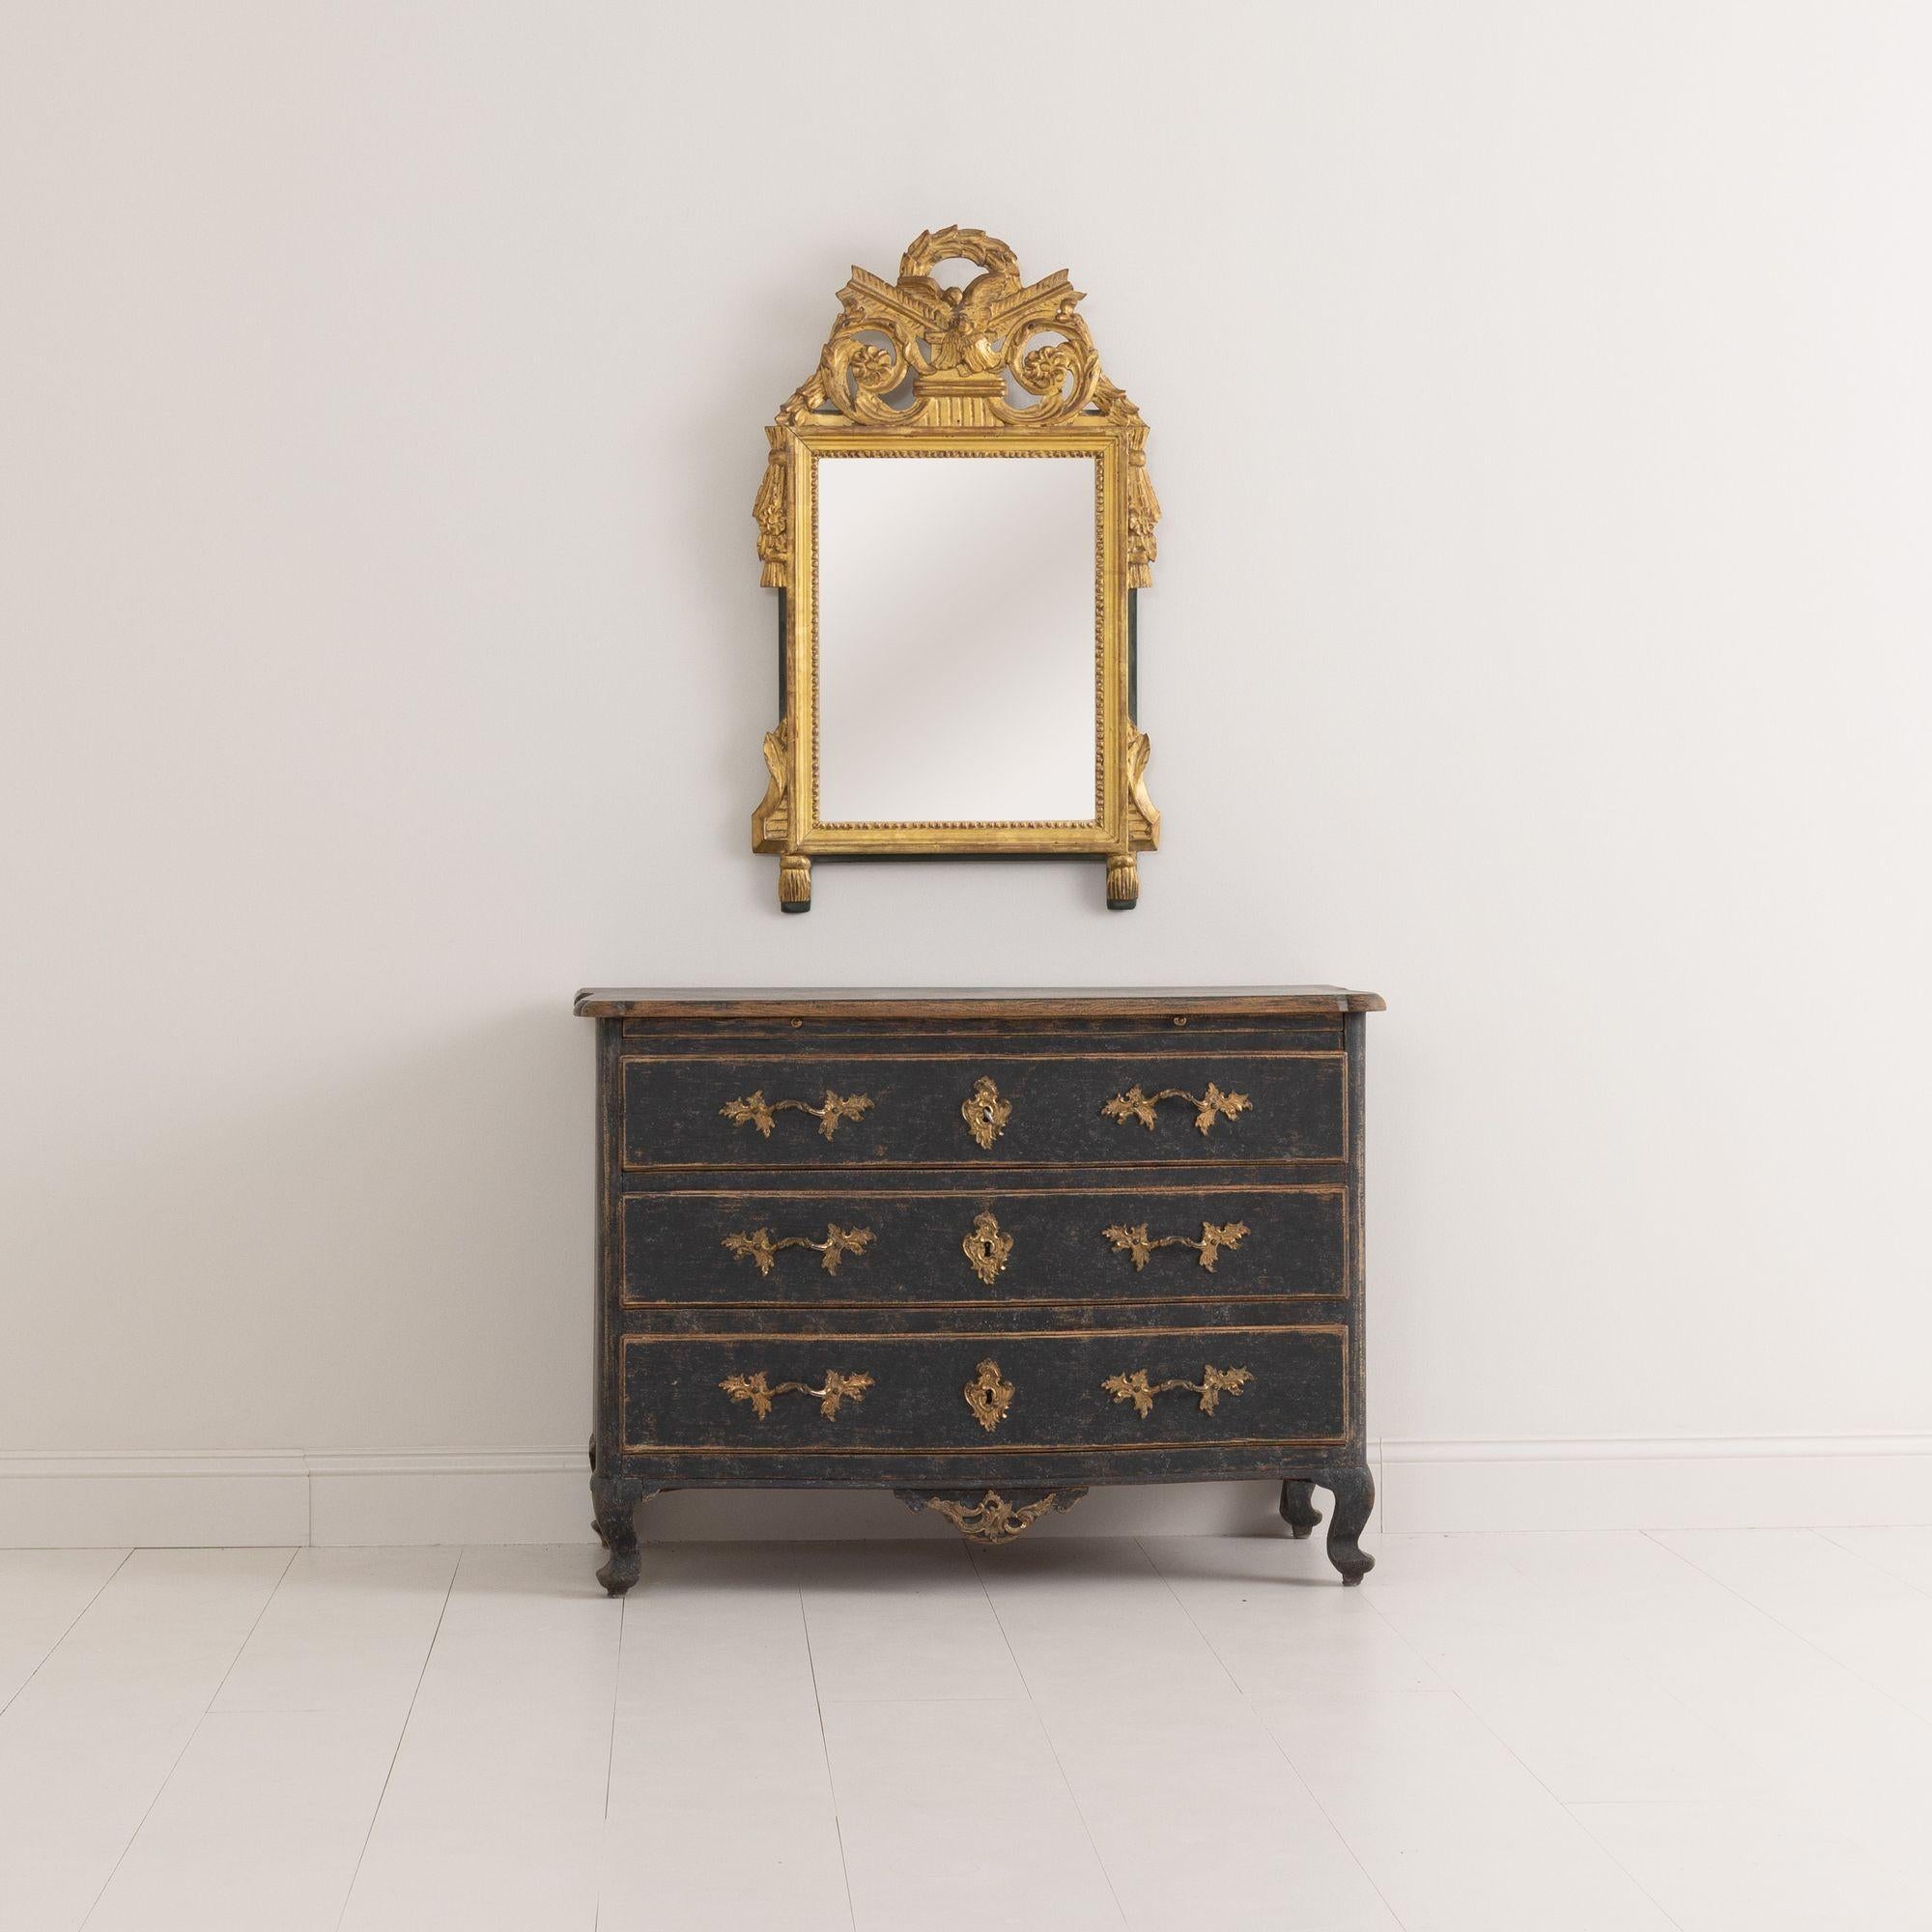 An exceptional 18th century Swedish commode from the Rococo period with original brass hardware, ormolu, and locks. This commode has a serpentine front, shaped top and apron to the front and sides, and is raised on cabriole legs. There is a pull-out